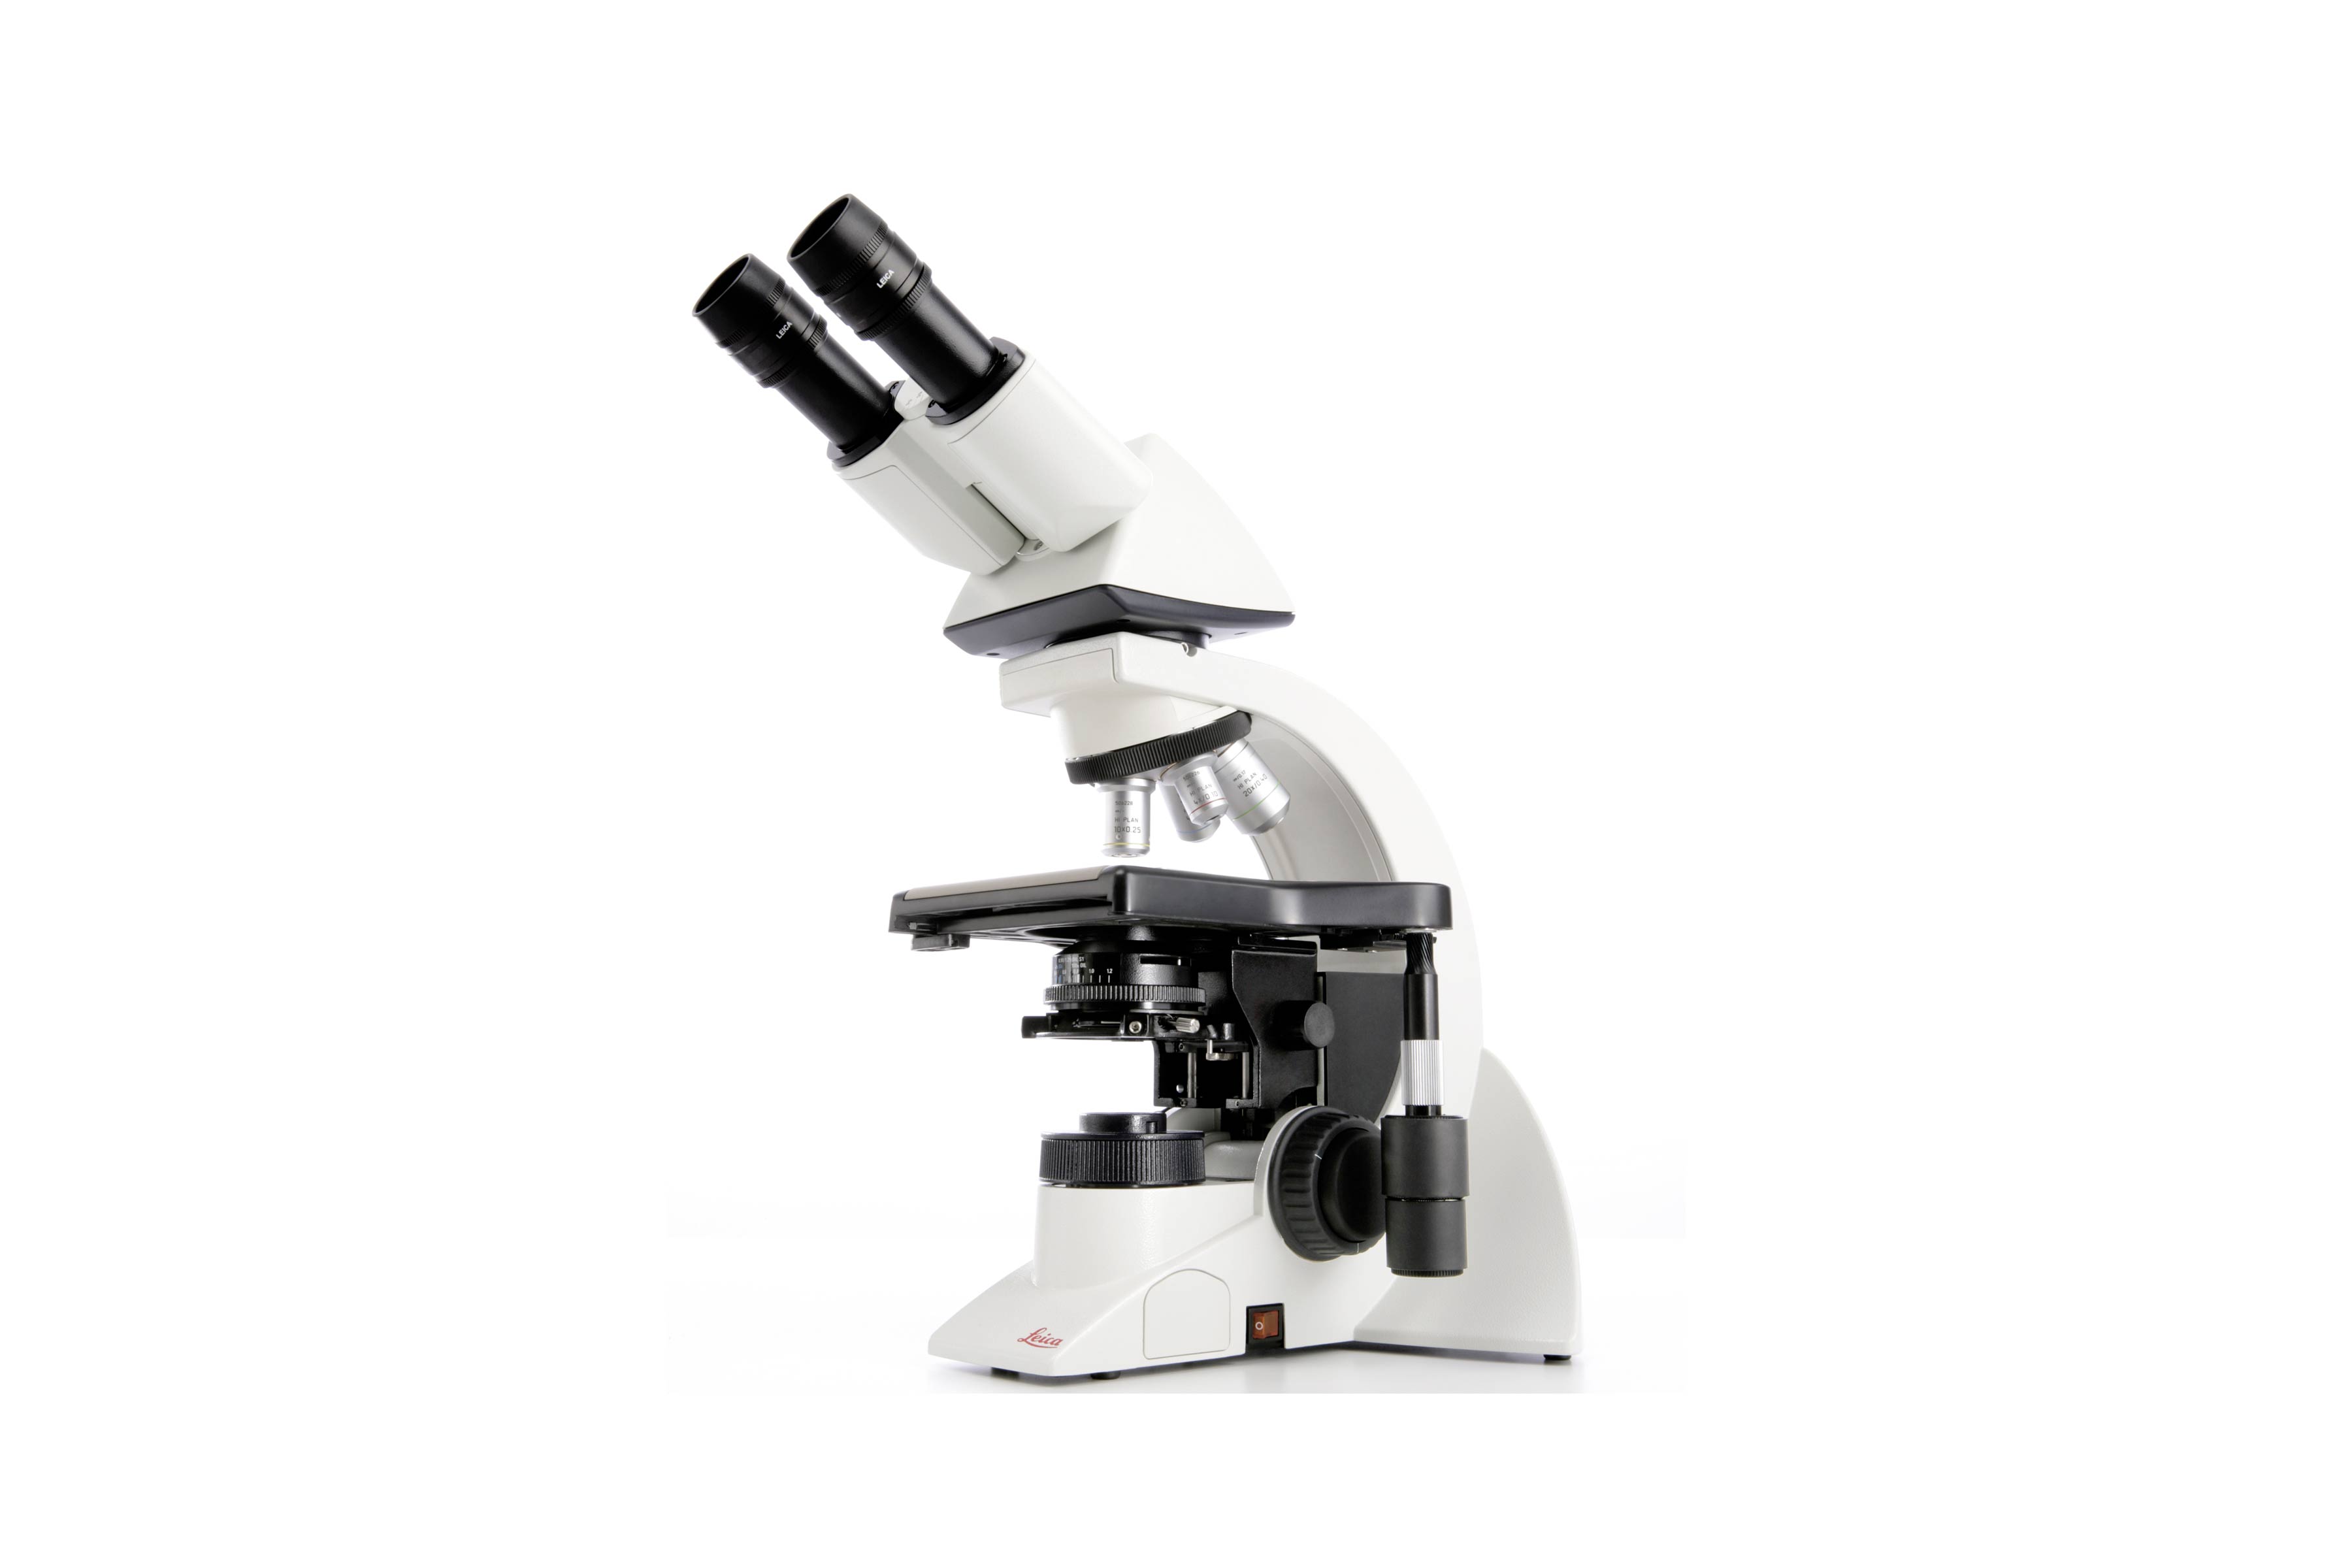 Biological microscope Leica DM1000 with accessories